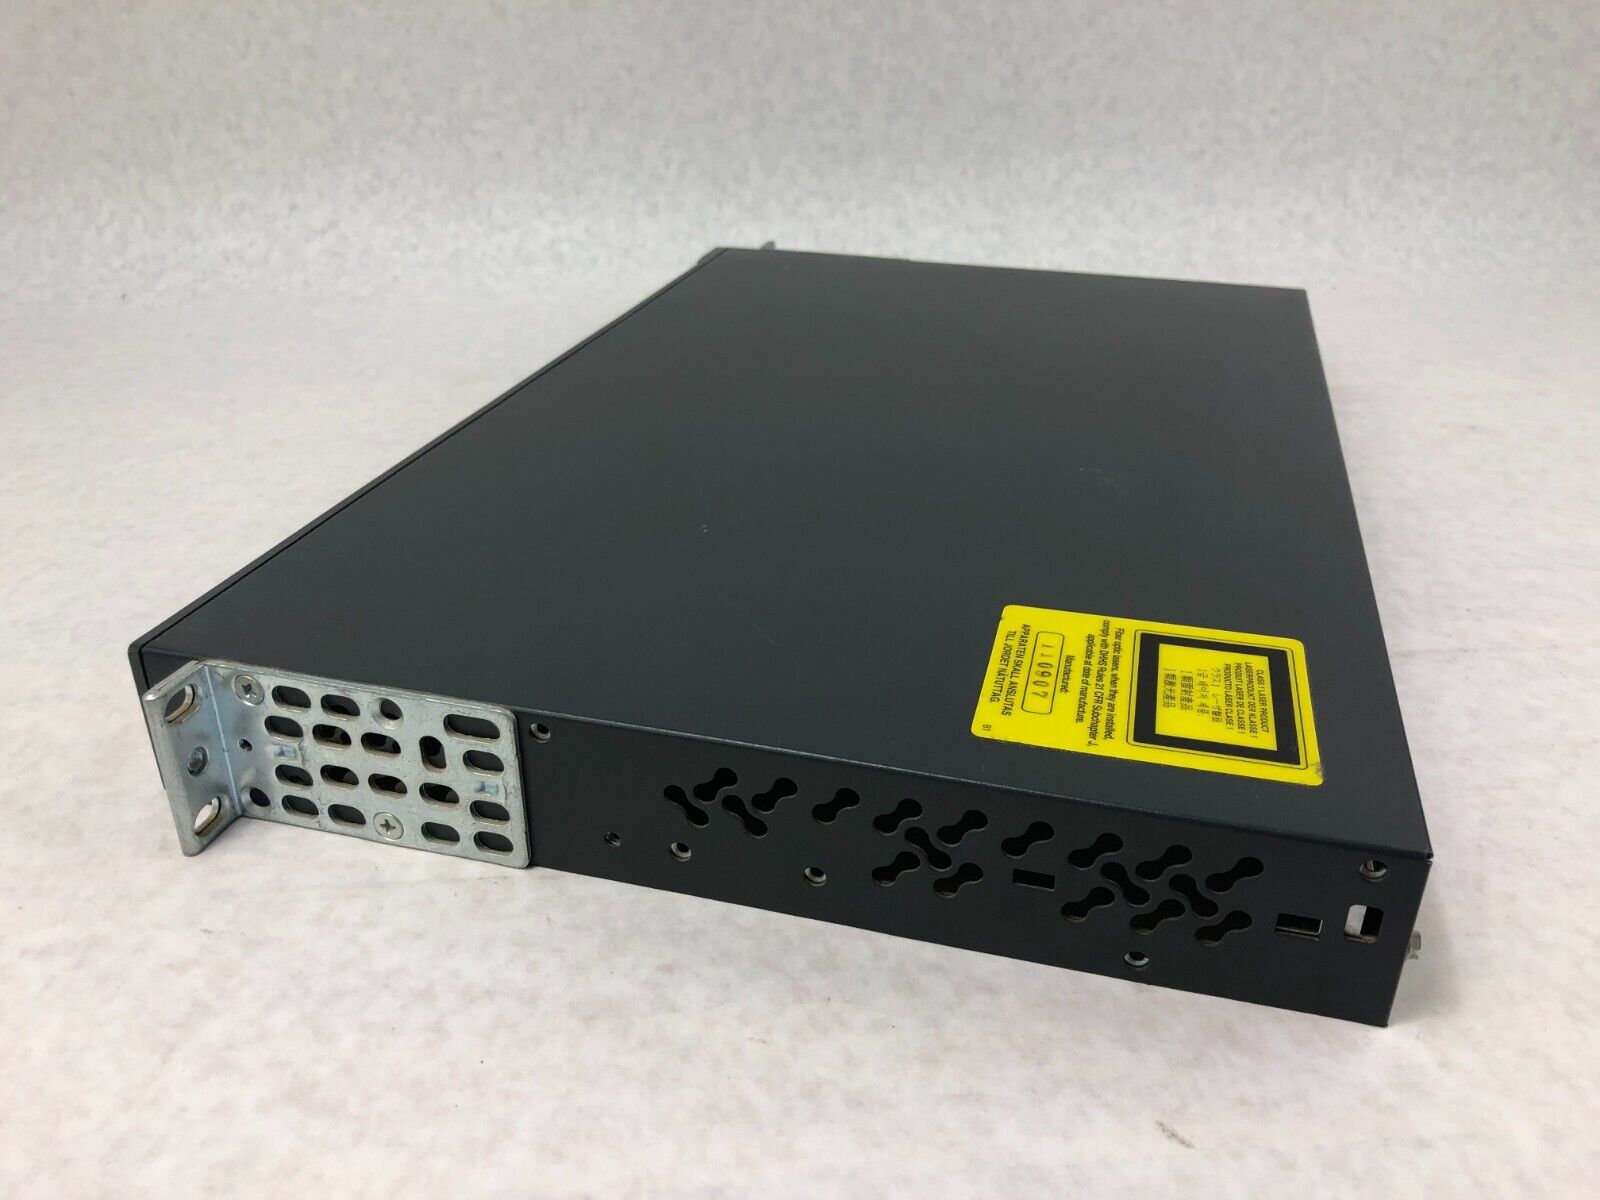 Cisco WS-C3750-24TS-S Catalyst 3750 Series 24 Port Managed Switch